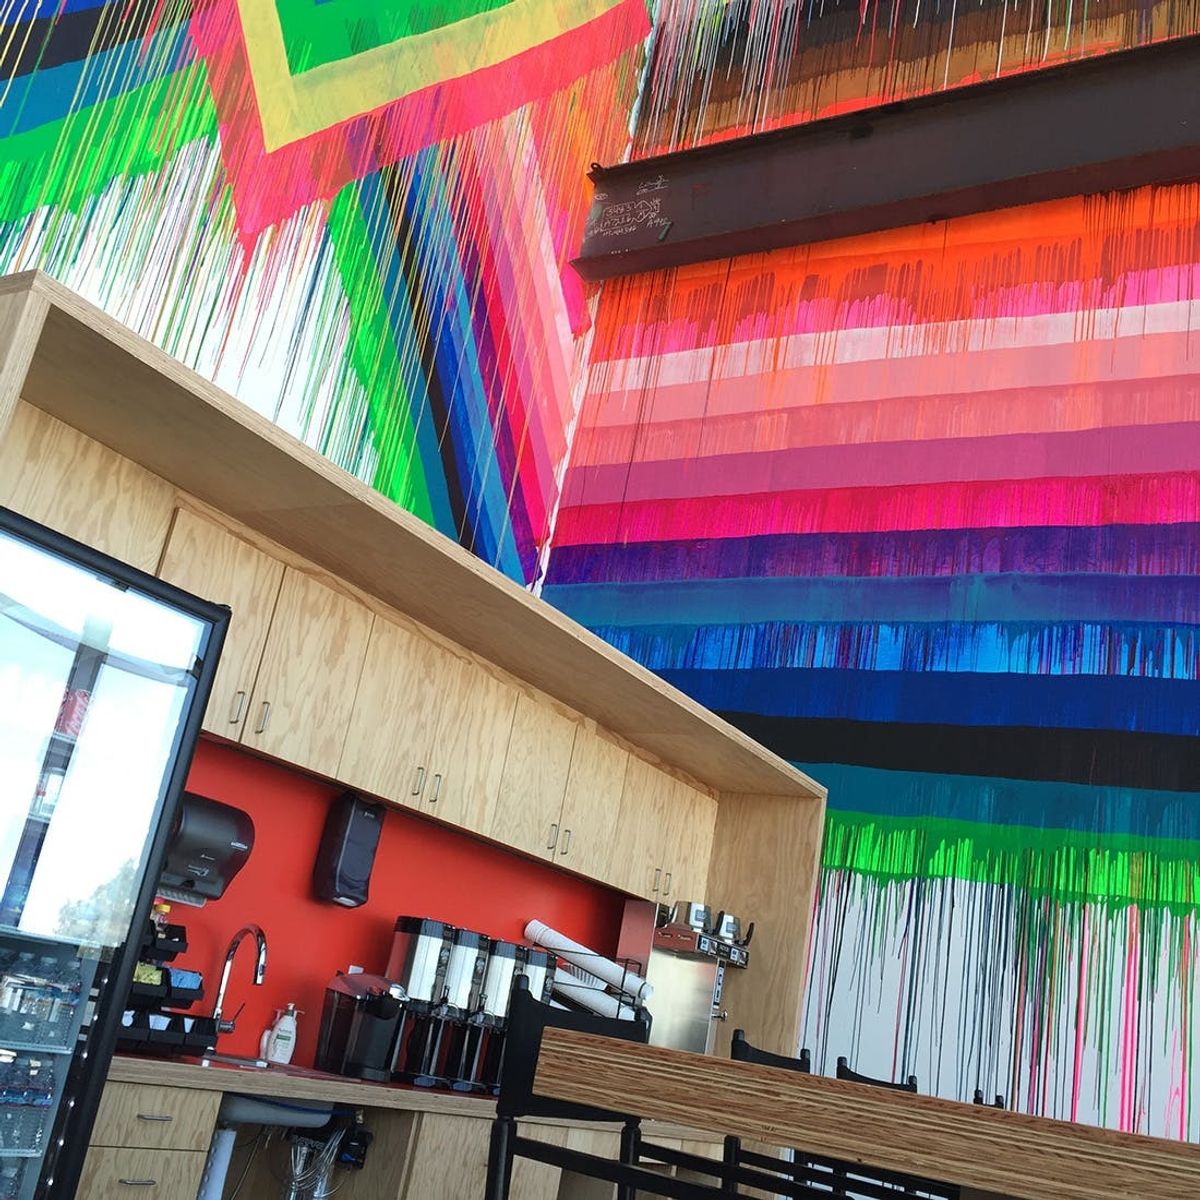 The 10 Coolest Things from Facebook’s New Offices